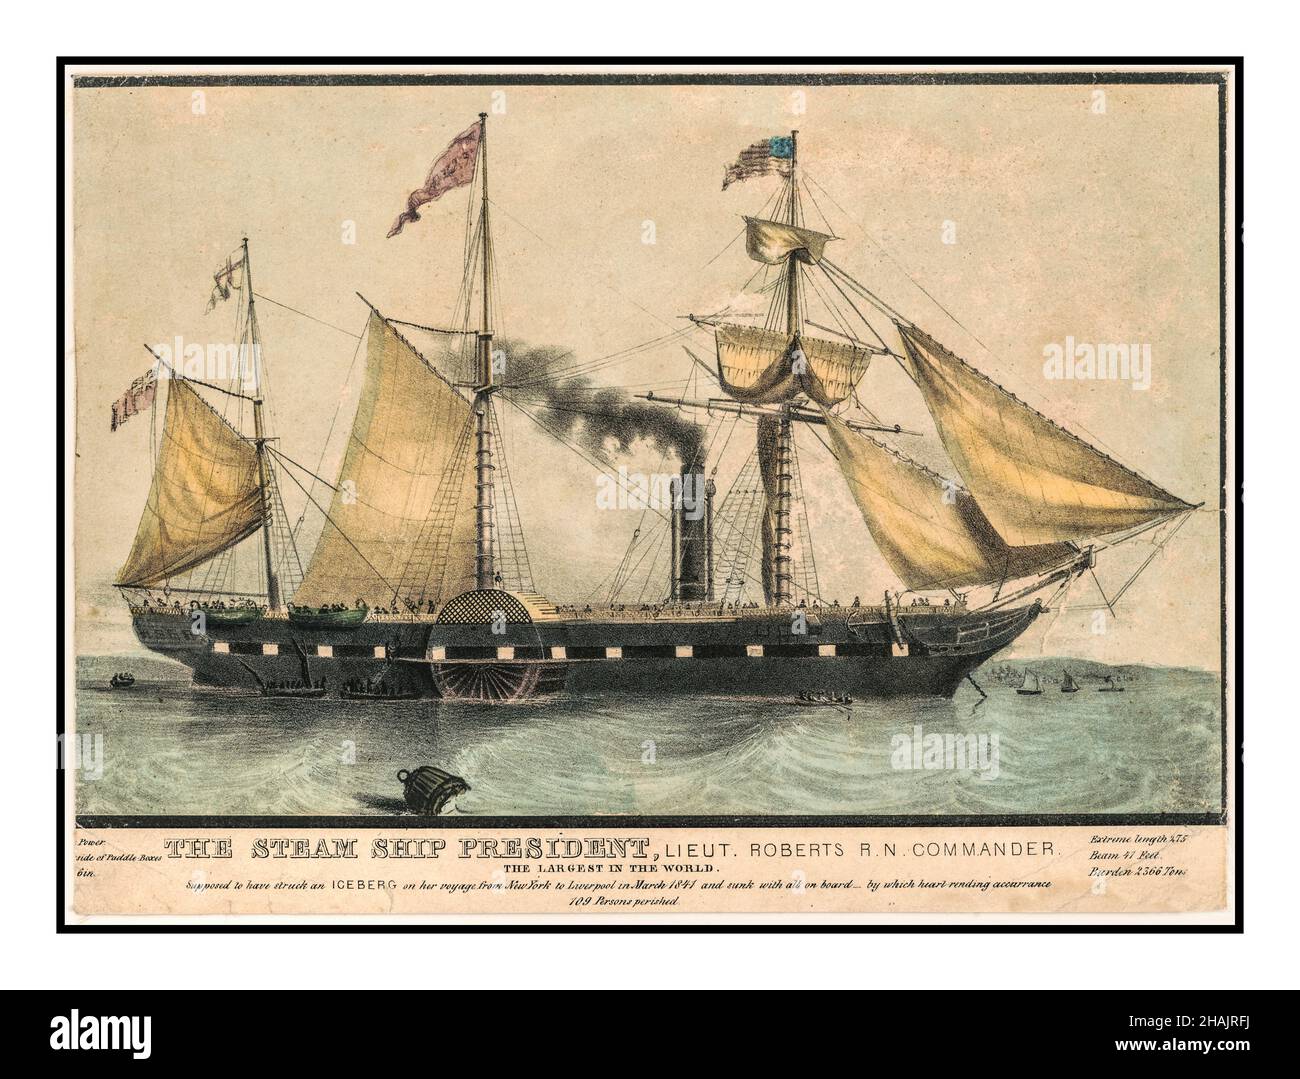 The Steam Ship 'President', Lieut. Roberts R.N. commander: the largest ship in the world N. Currier [New York : Published by N.Currier, between 1835 and 1907] Lithograph Hand-colored 1830-1910  Currier & Ives : a catalogue raisonné /  1 print : lithograph, hand-colored. Stock Photo